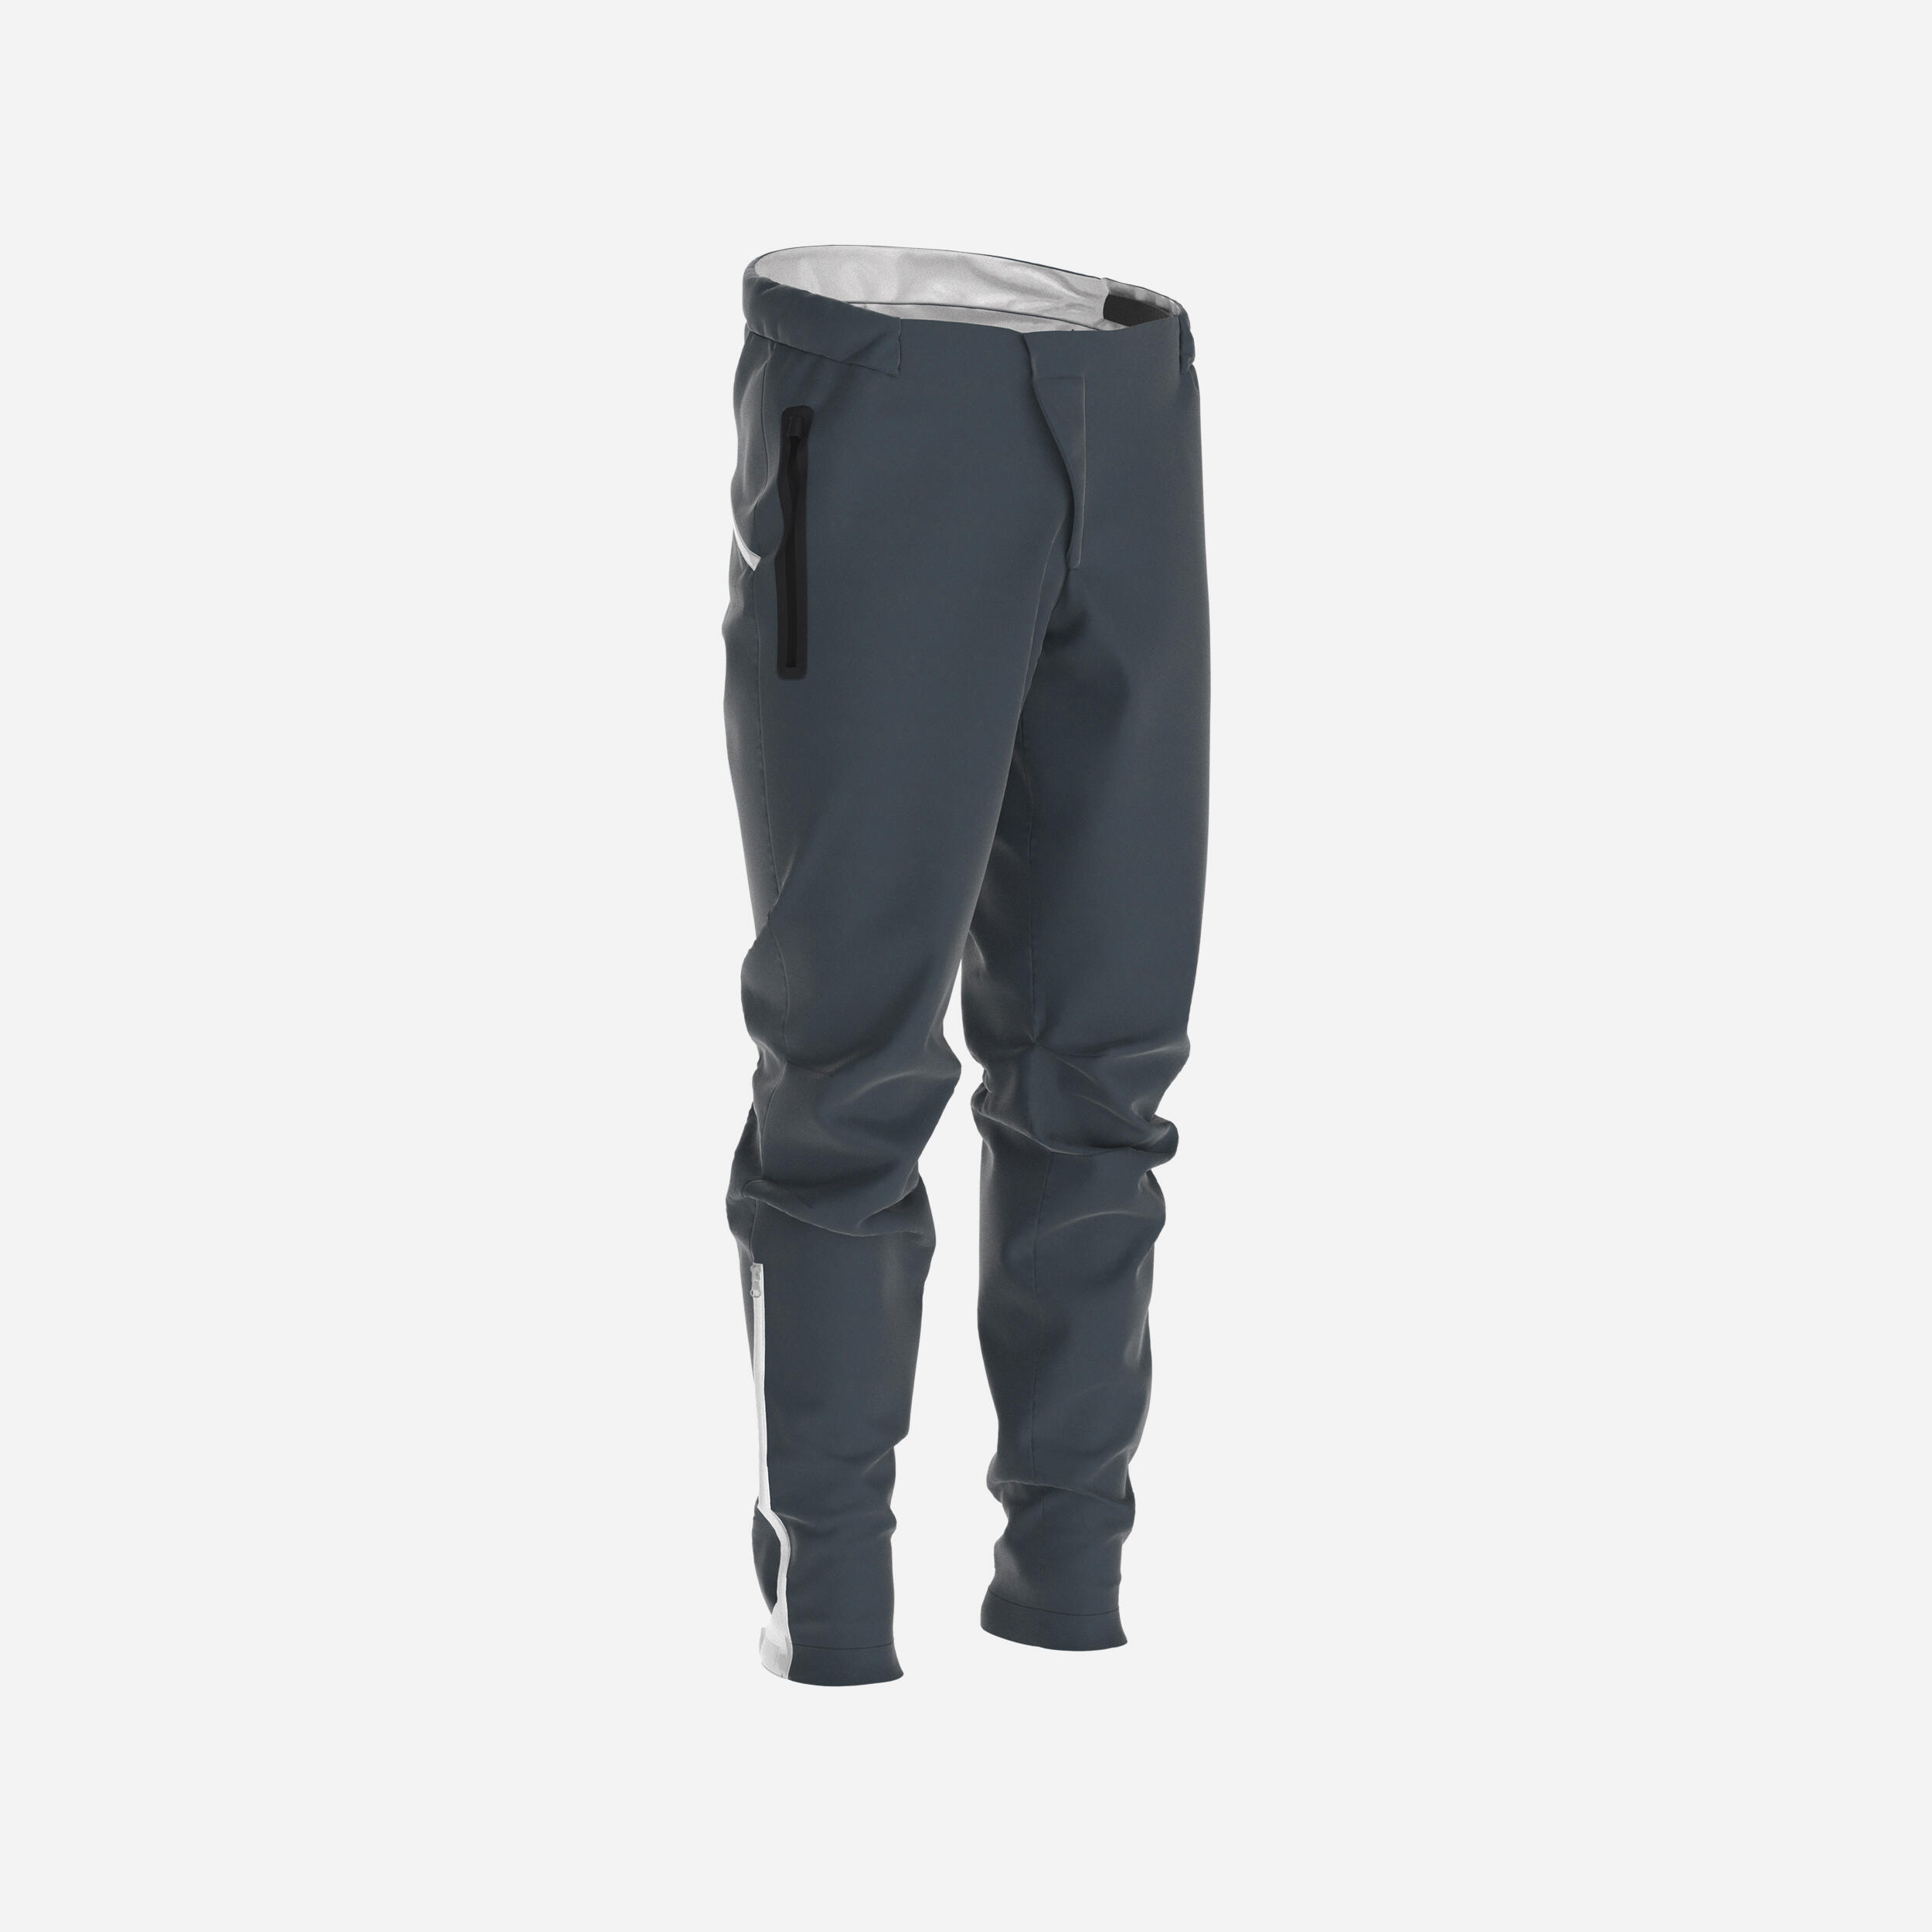 Kids' Waterproof Cycling Overtrousers 500 BTWIN | Decathlon